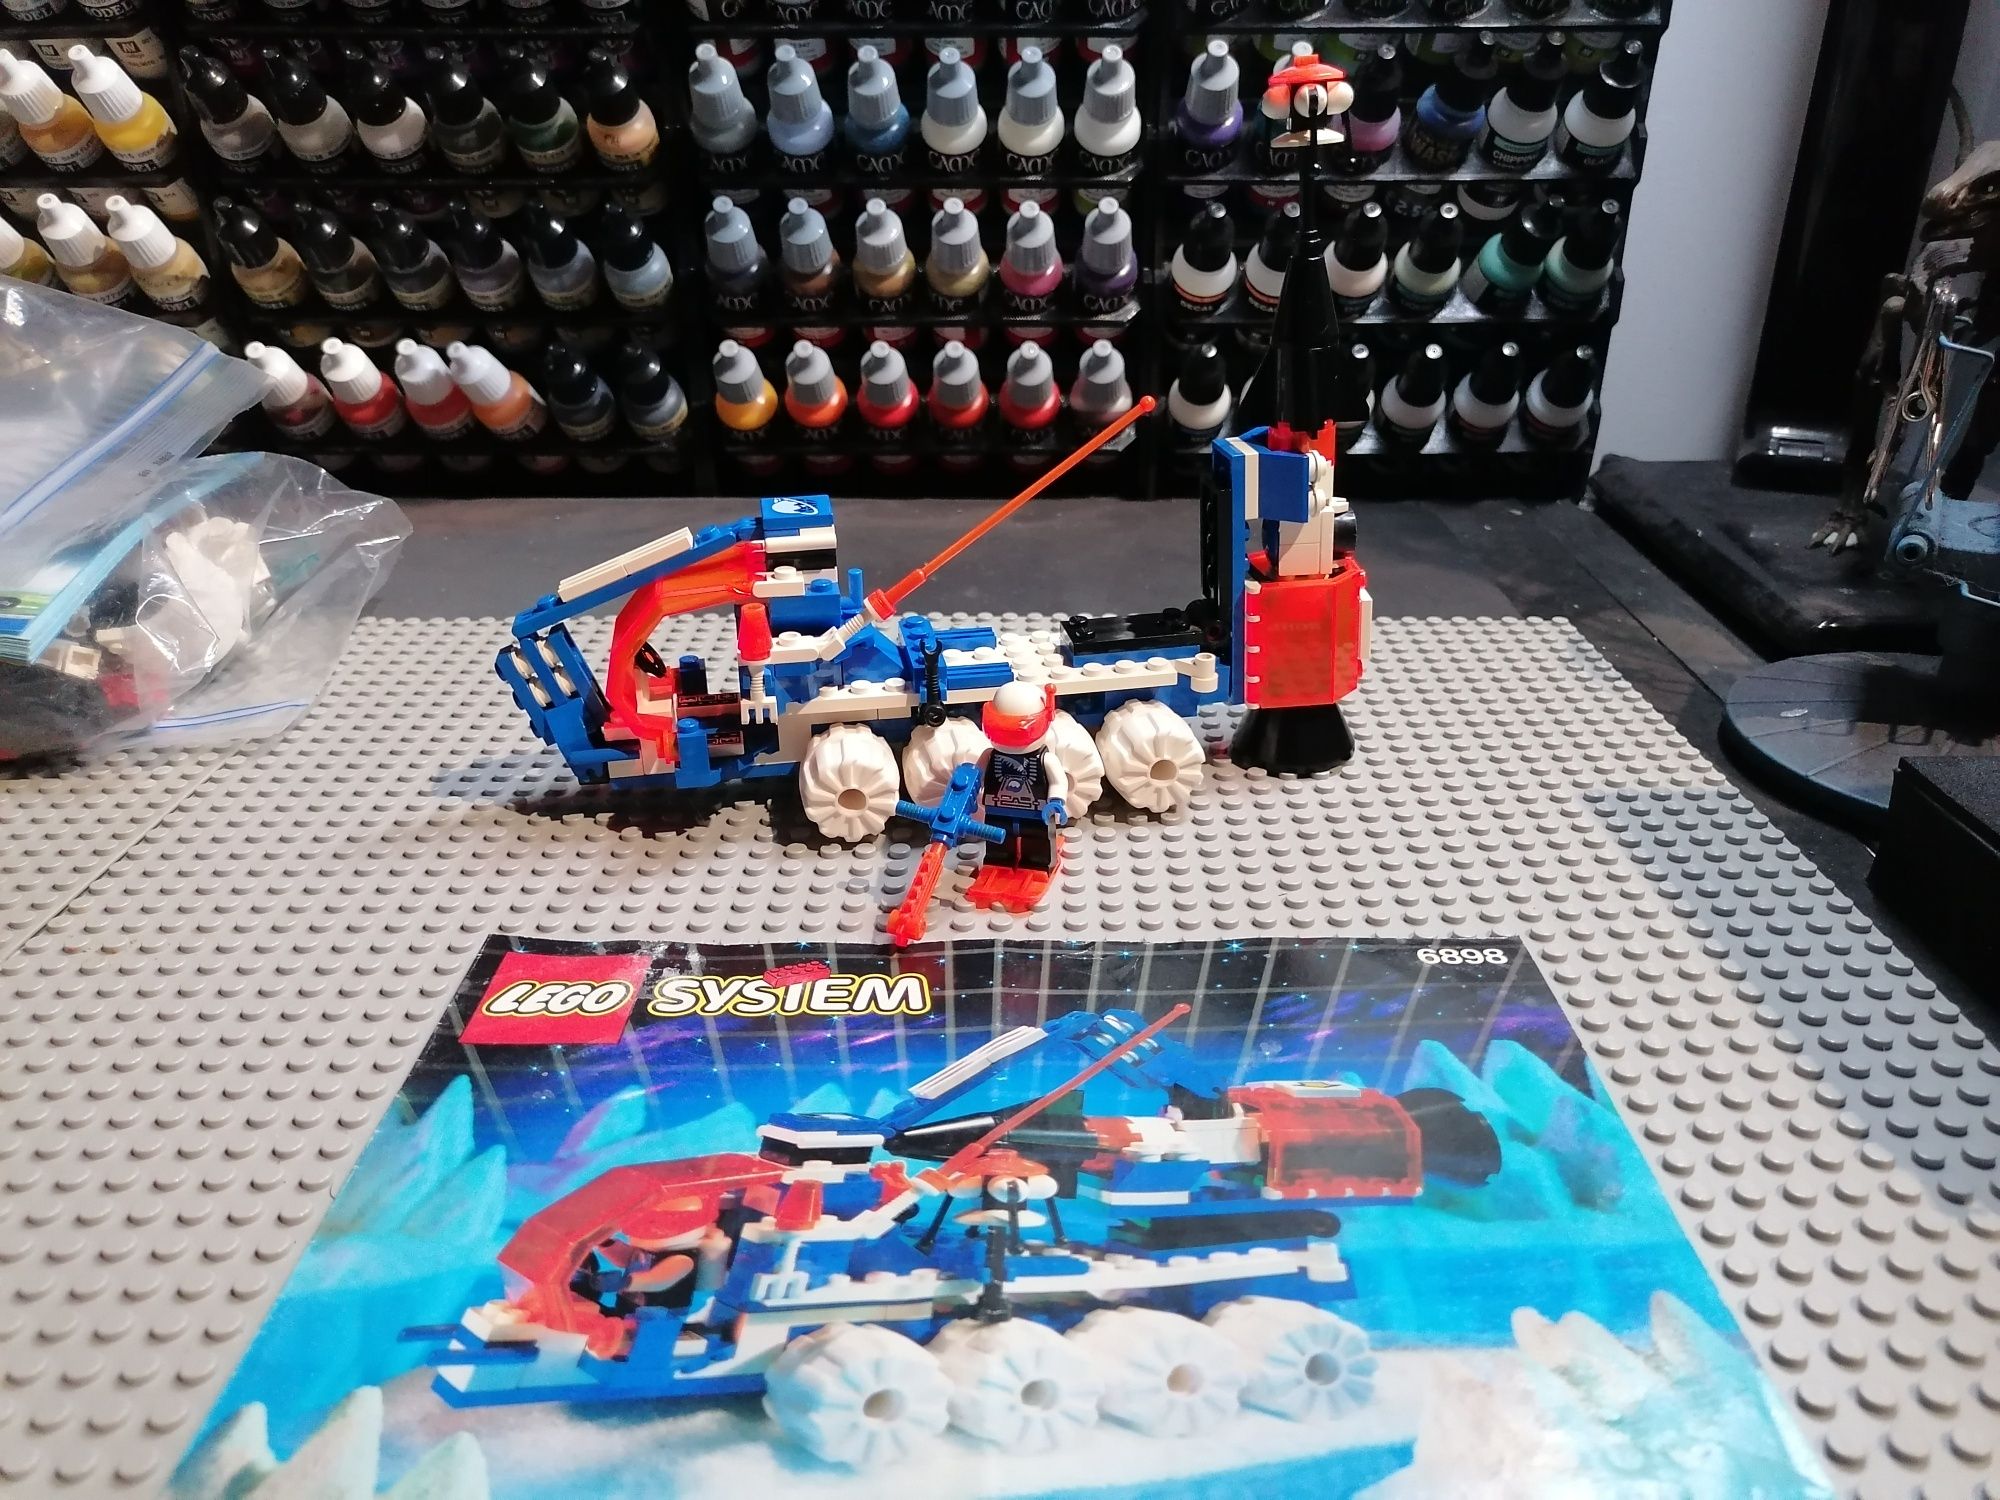 Lego System space 6898